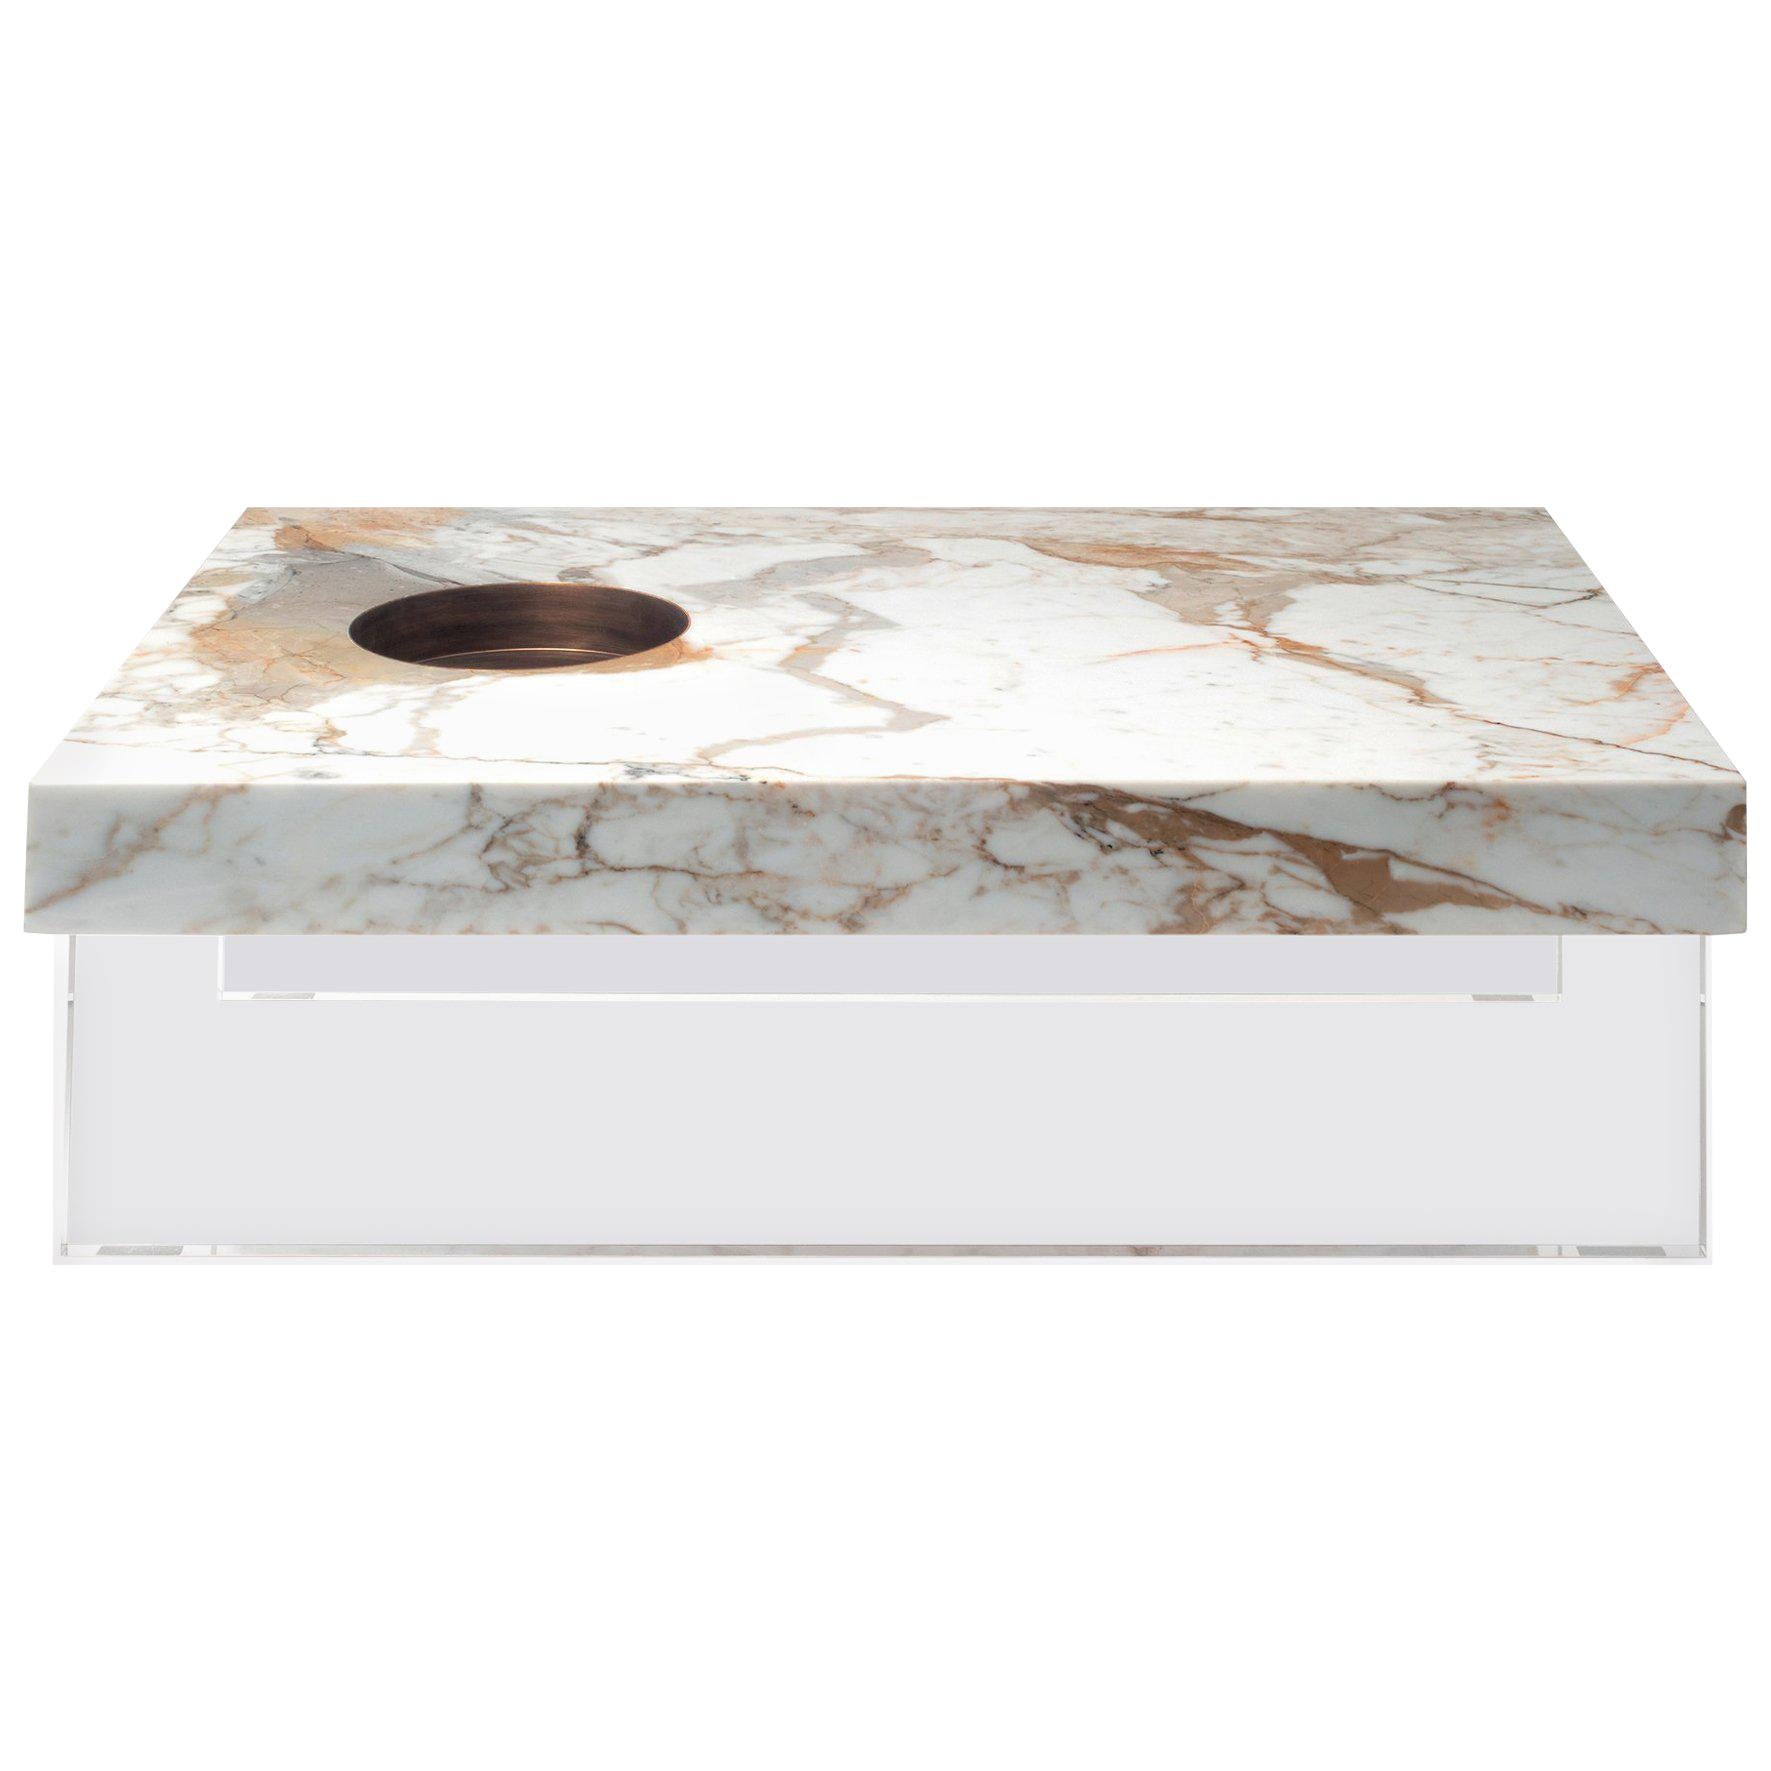 New Modern Coffee Table in Calacatta Gold Marble, creator Stefano Belingardi For Sale